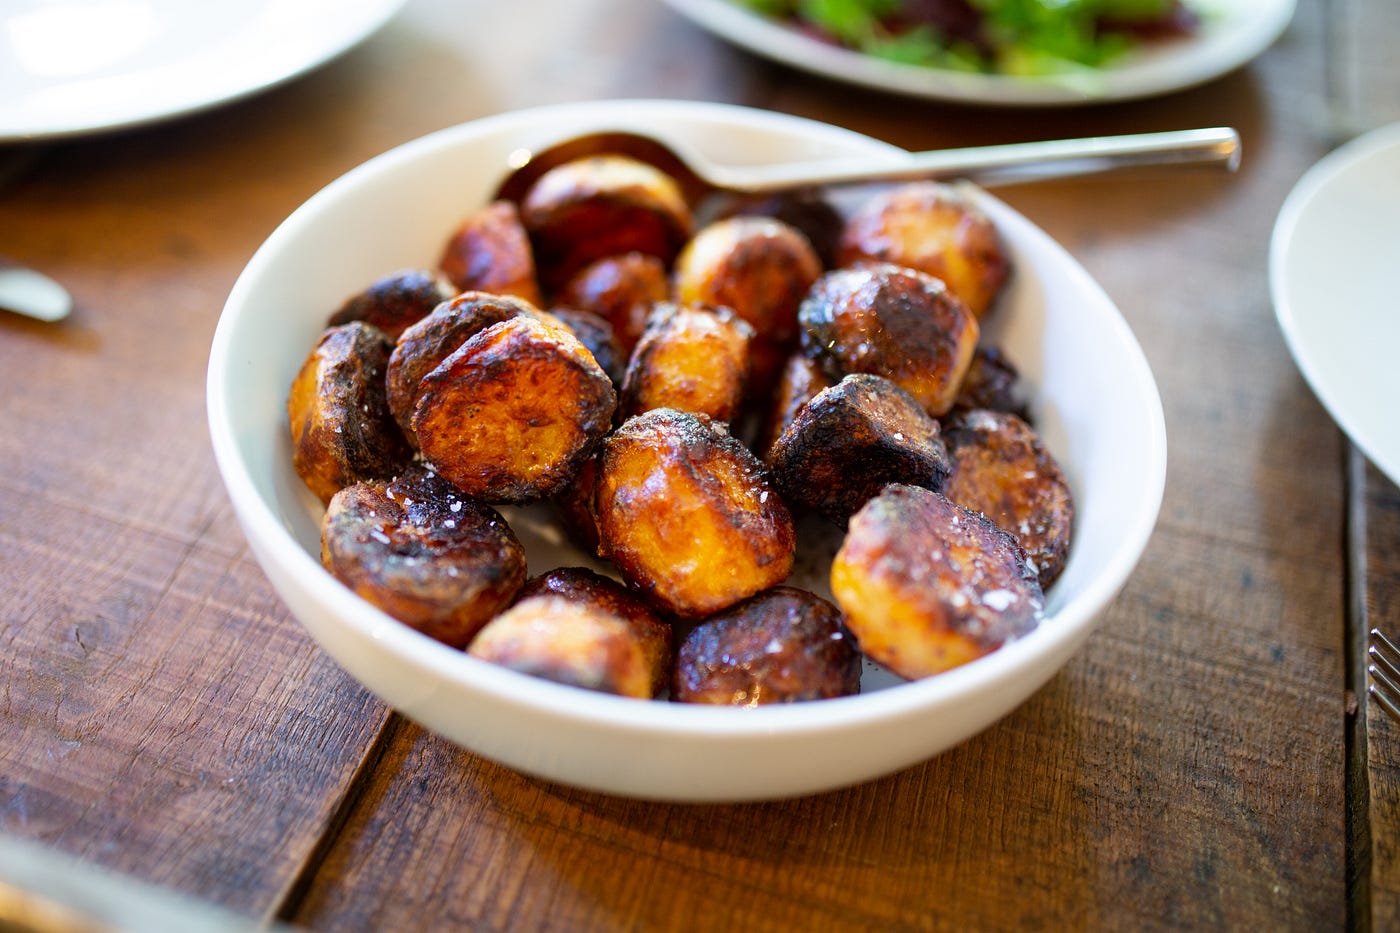 A white bowl of roasted potatoes sits on a wooden table. A new study shows diets with beans or potatoes both lead to weight loss.